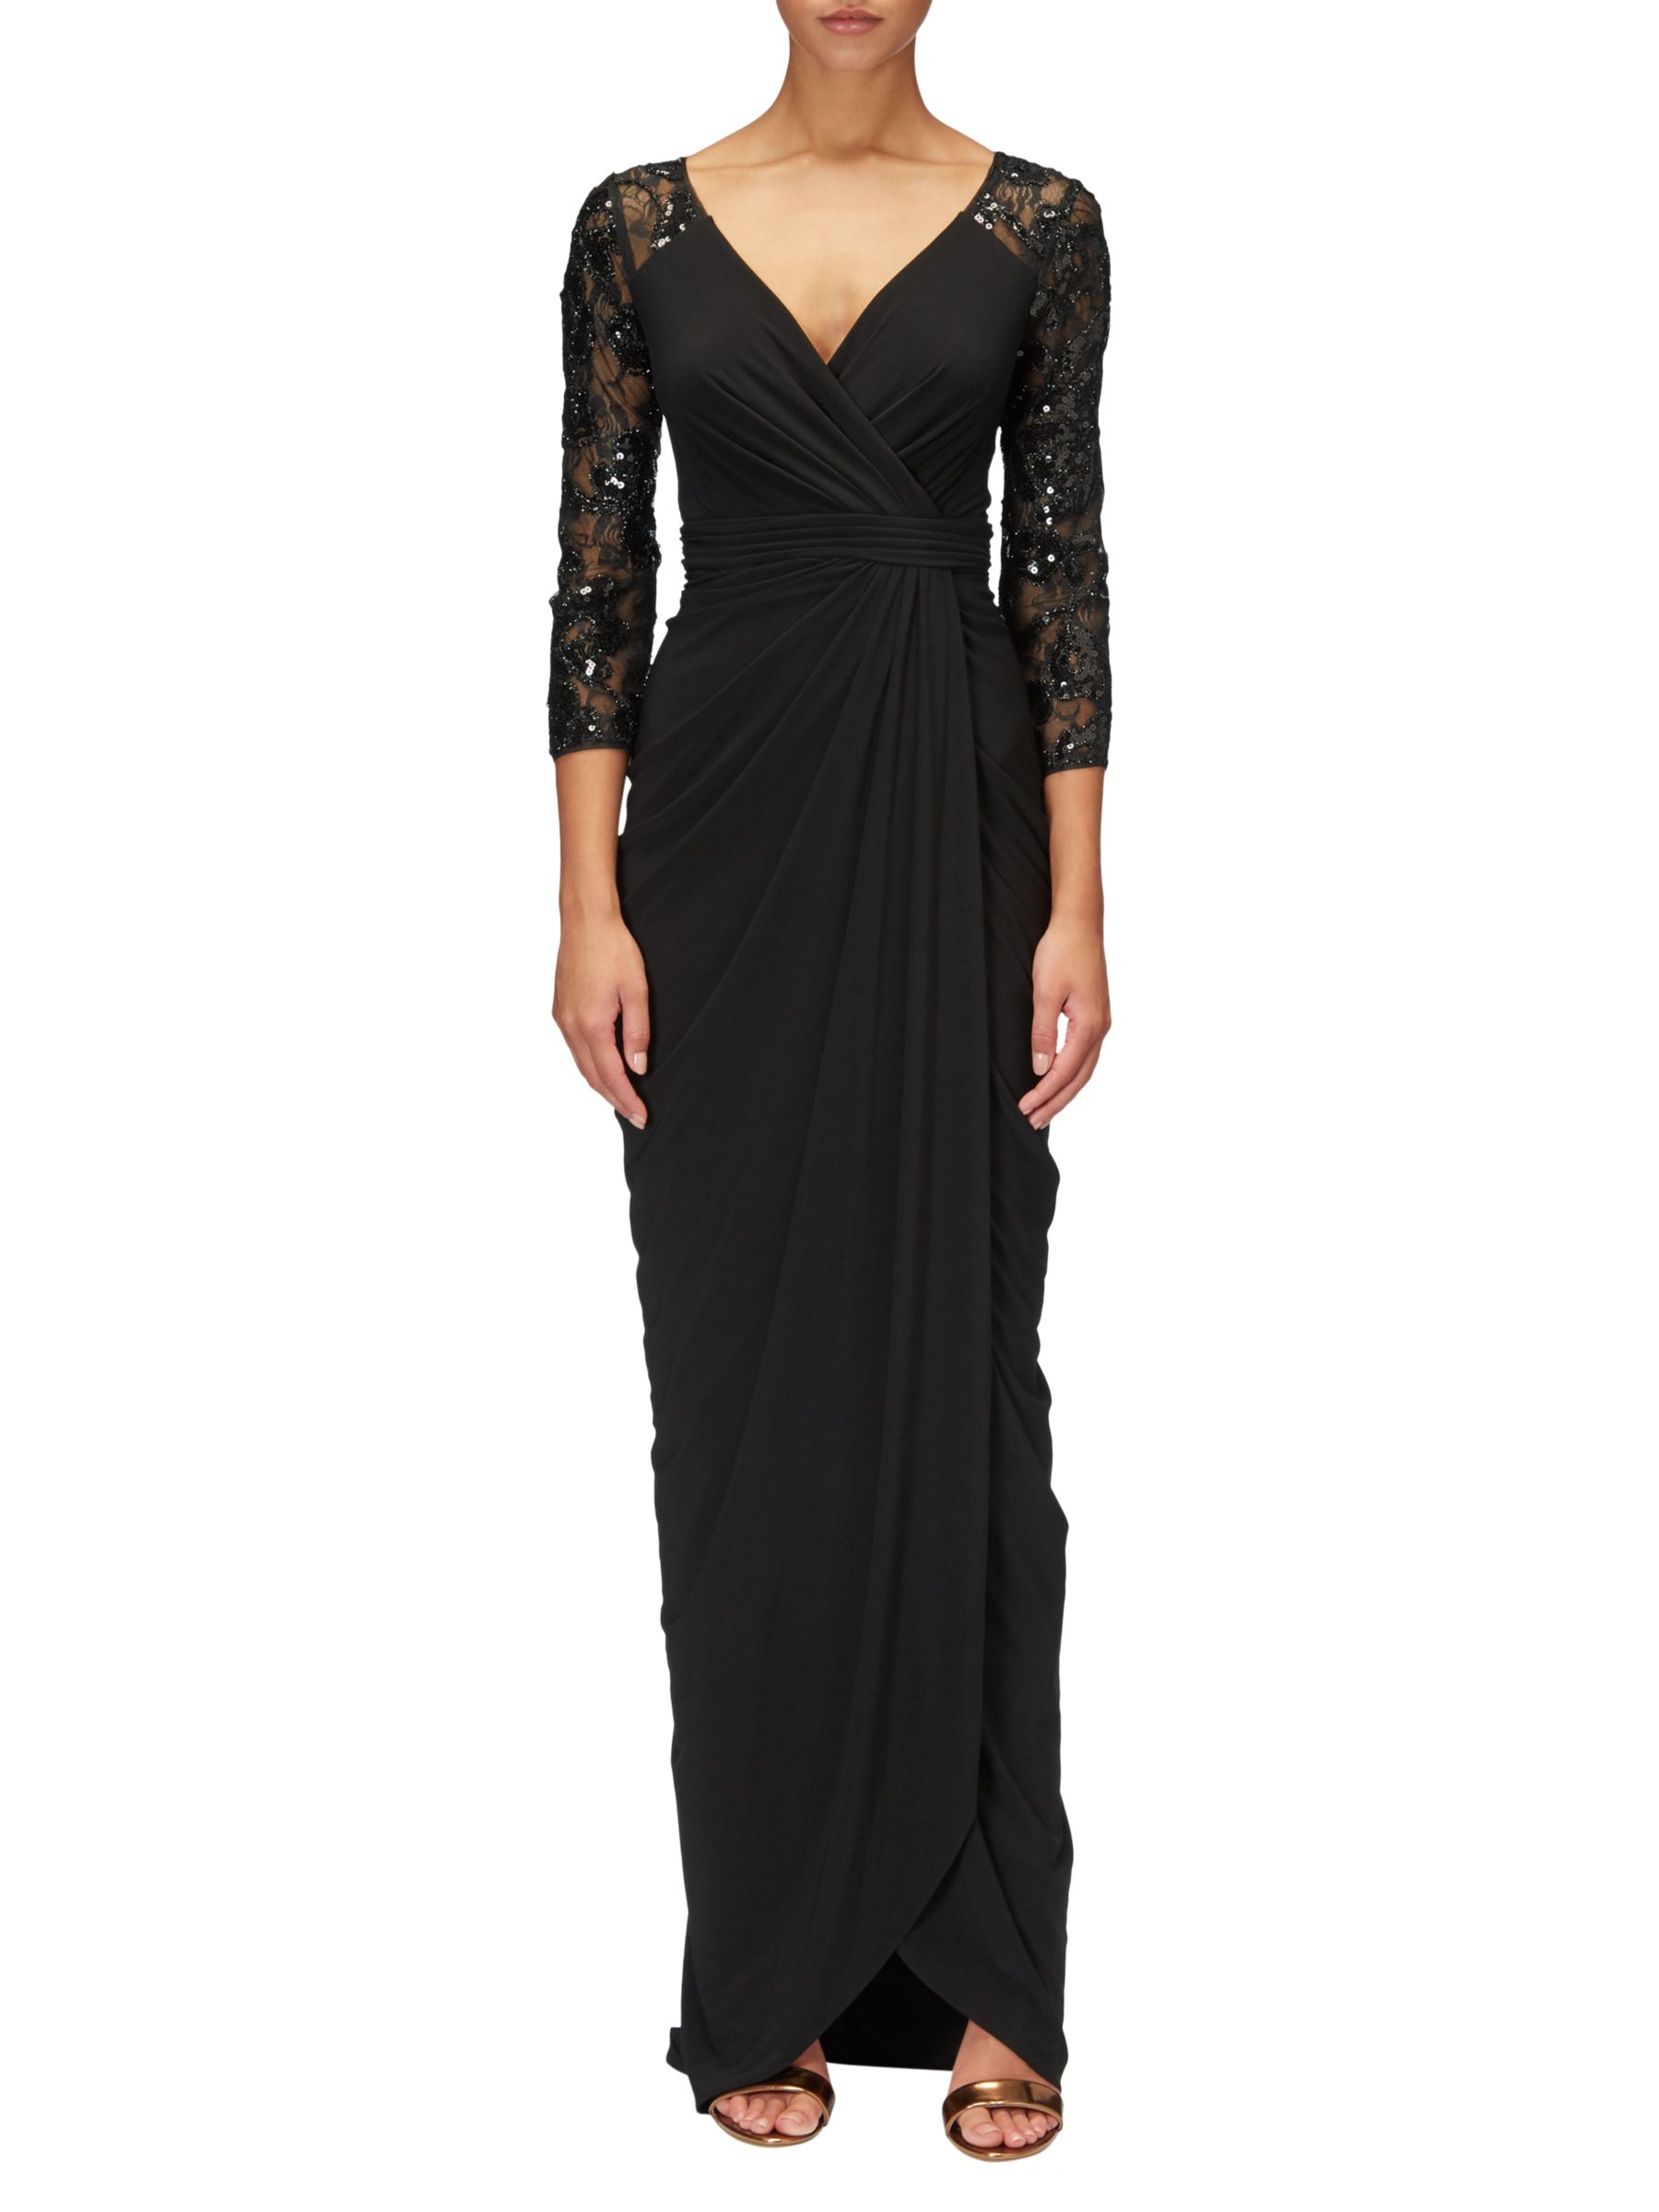 Adrianna Papell Long Lace Sleeved Dress, Black at John Lewis & Partners